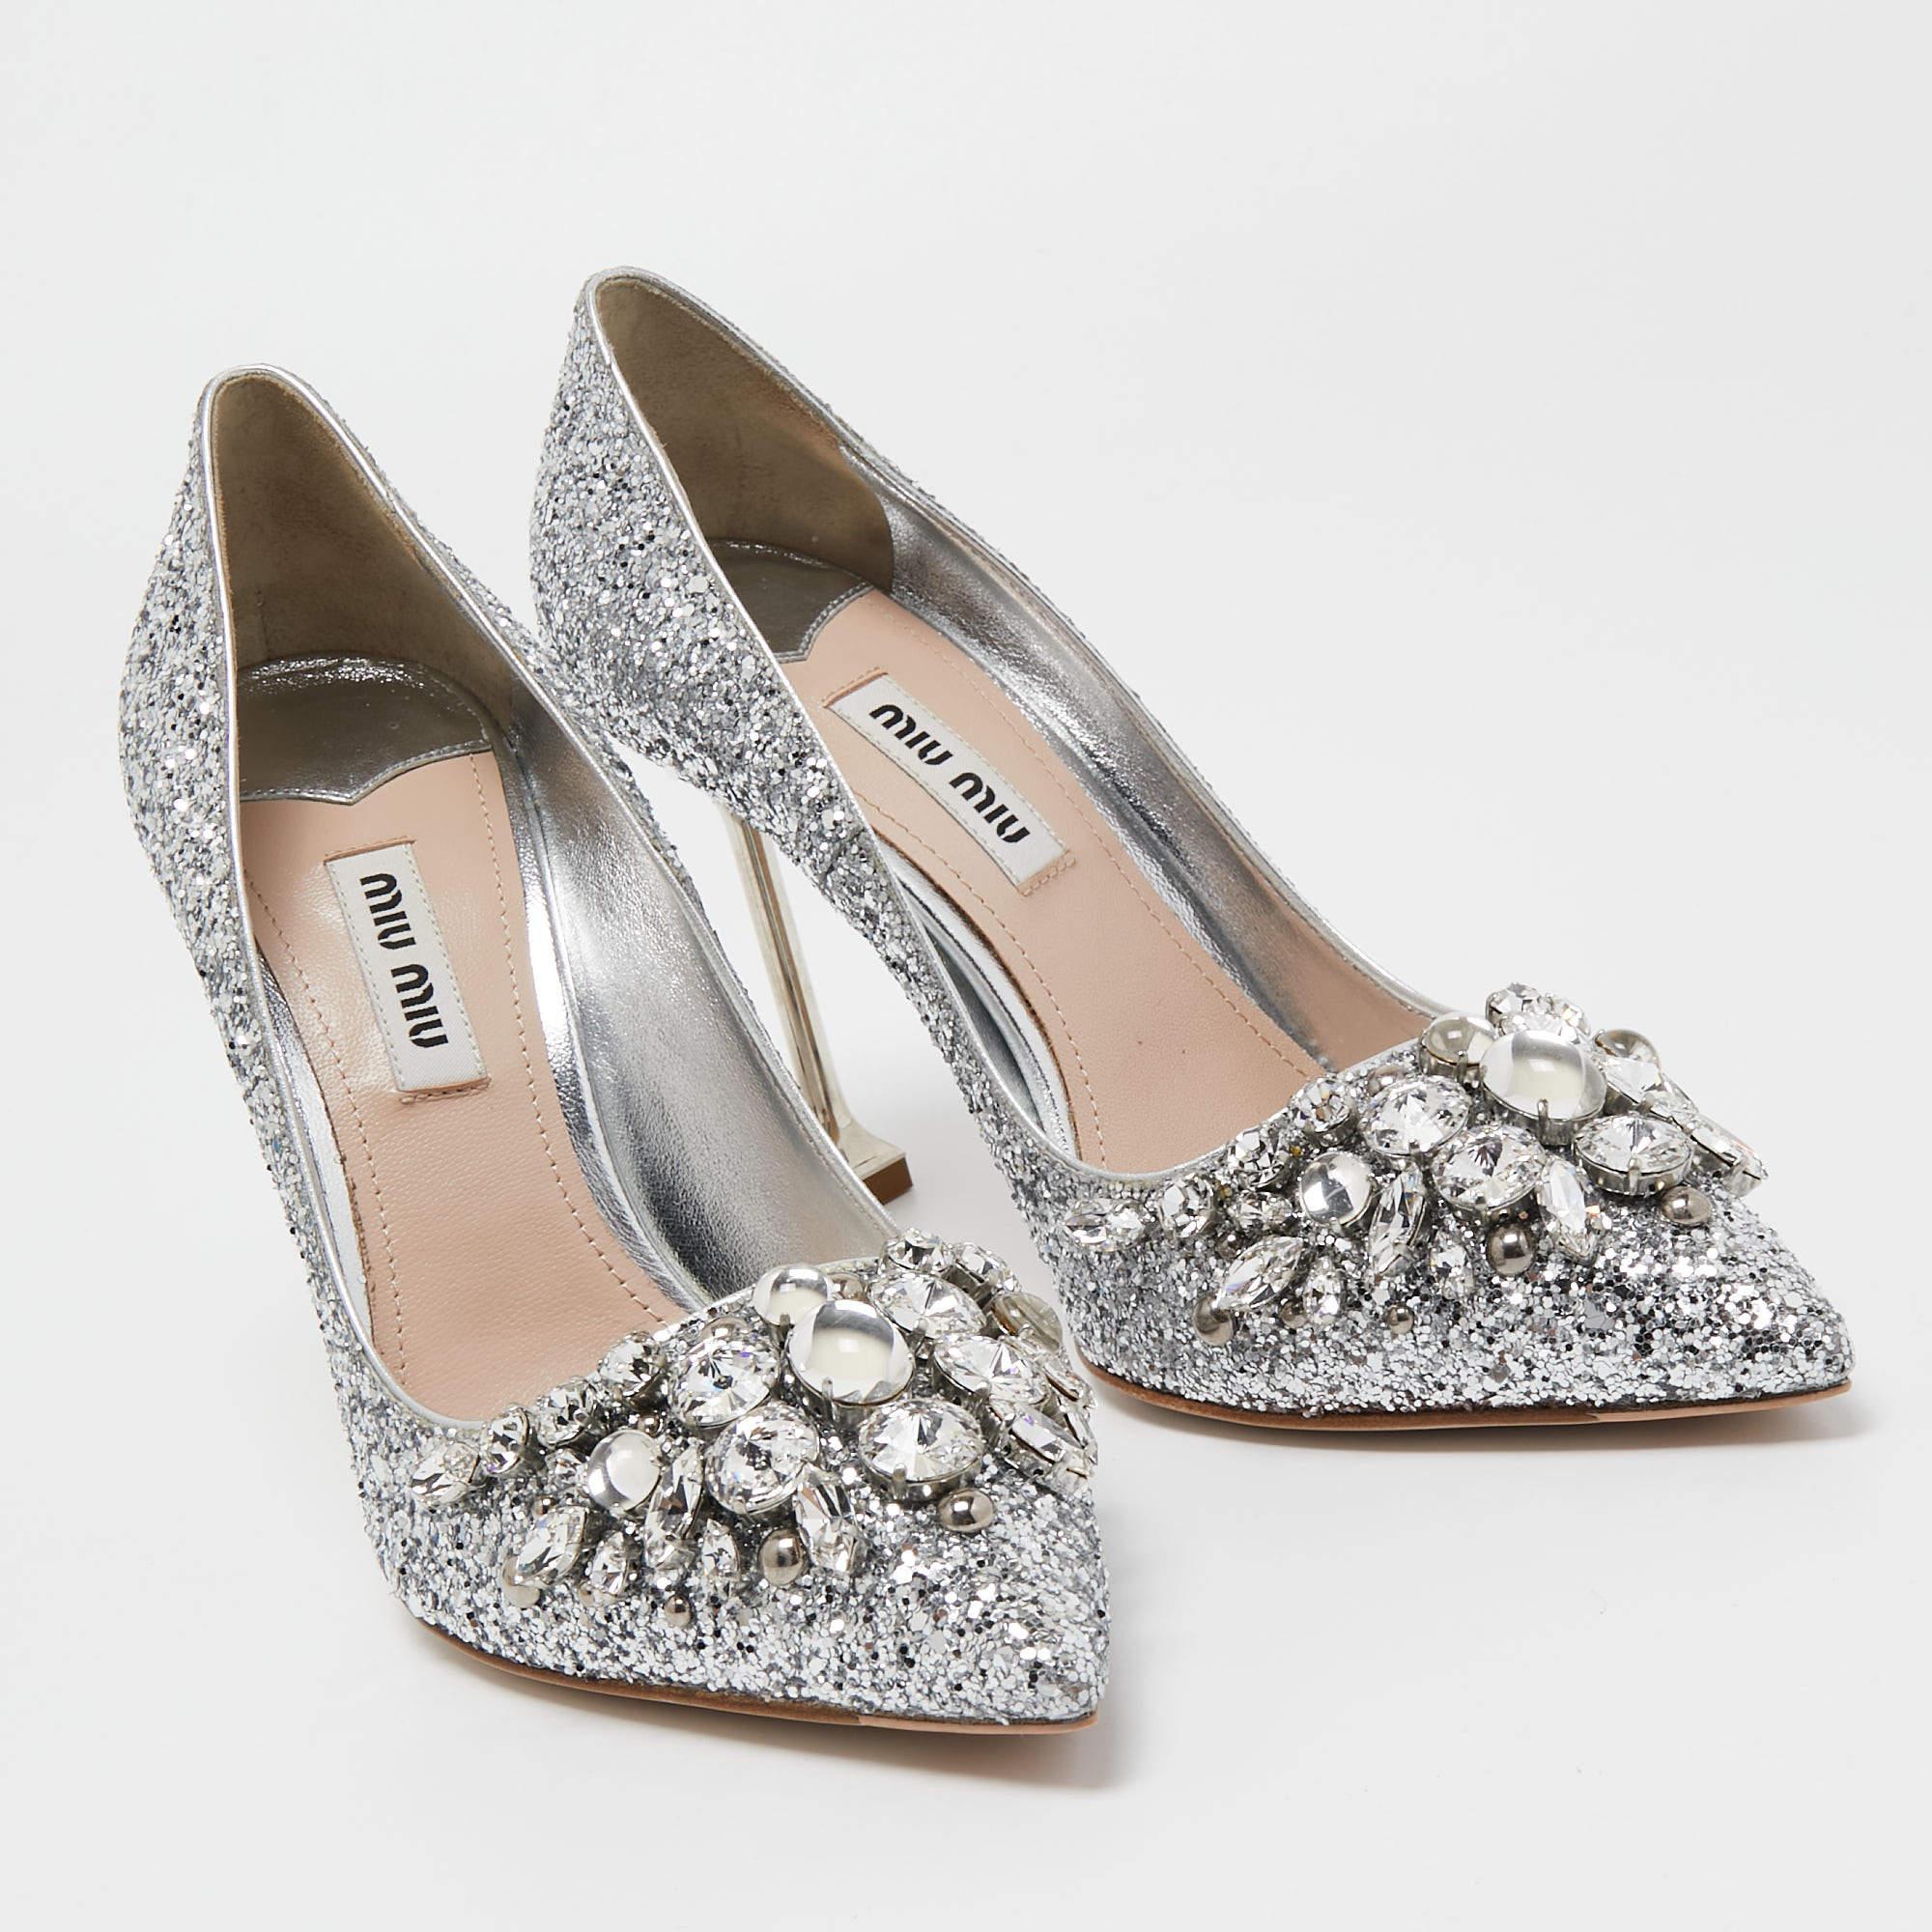 Women's Miu Miu Silver Glitter Crystal Embellished Pointed Toe Pumps Size 35.5